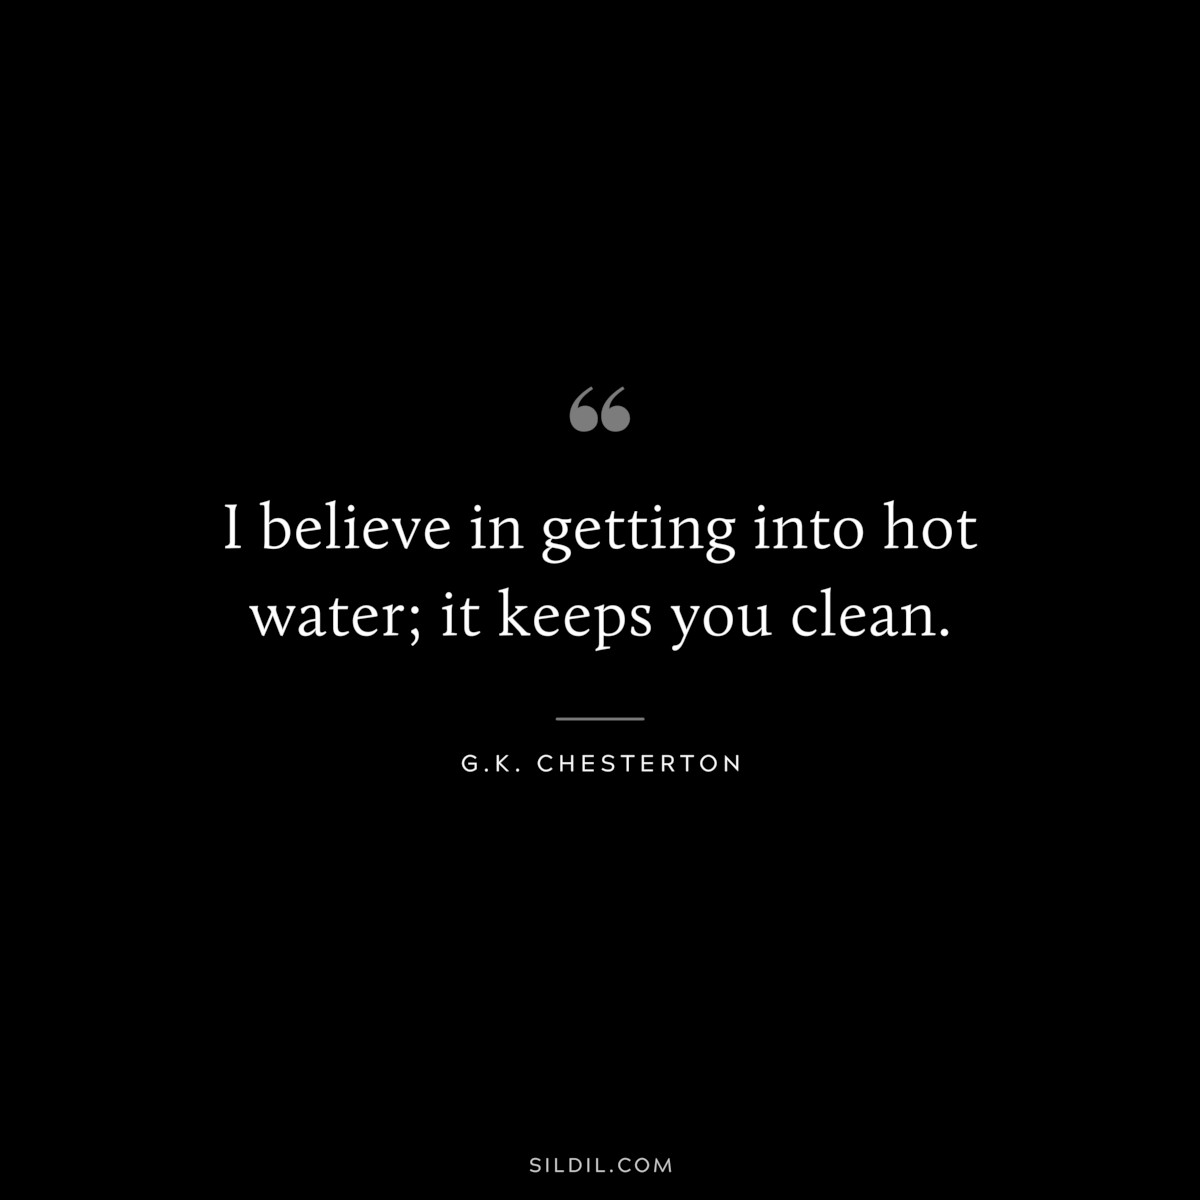 I believe in getting into hot water; it keeps you clean. ― G.K. Chesterton